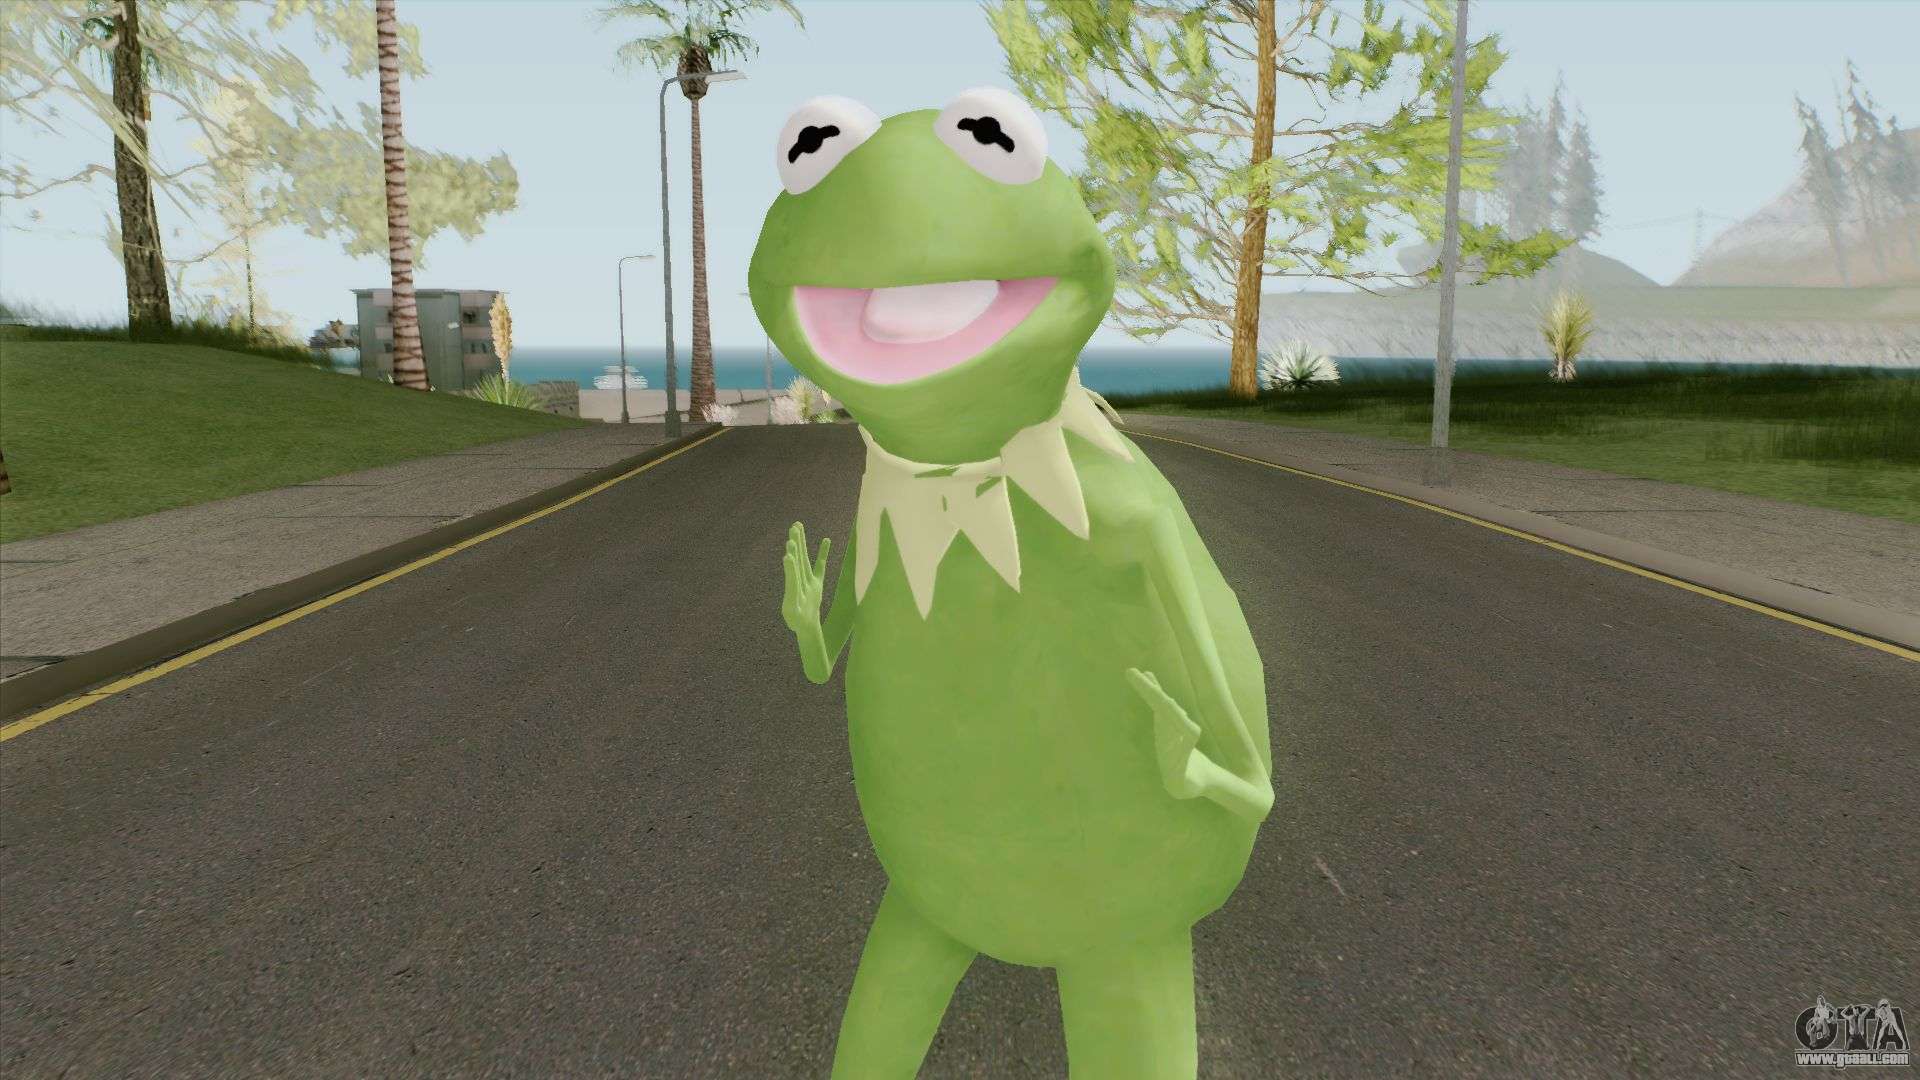 Kermit The Frog for GTA San Andreas